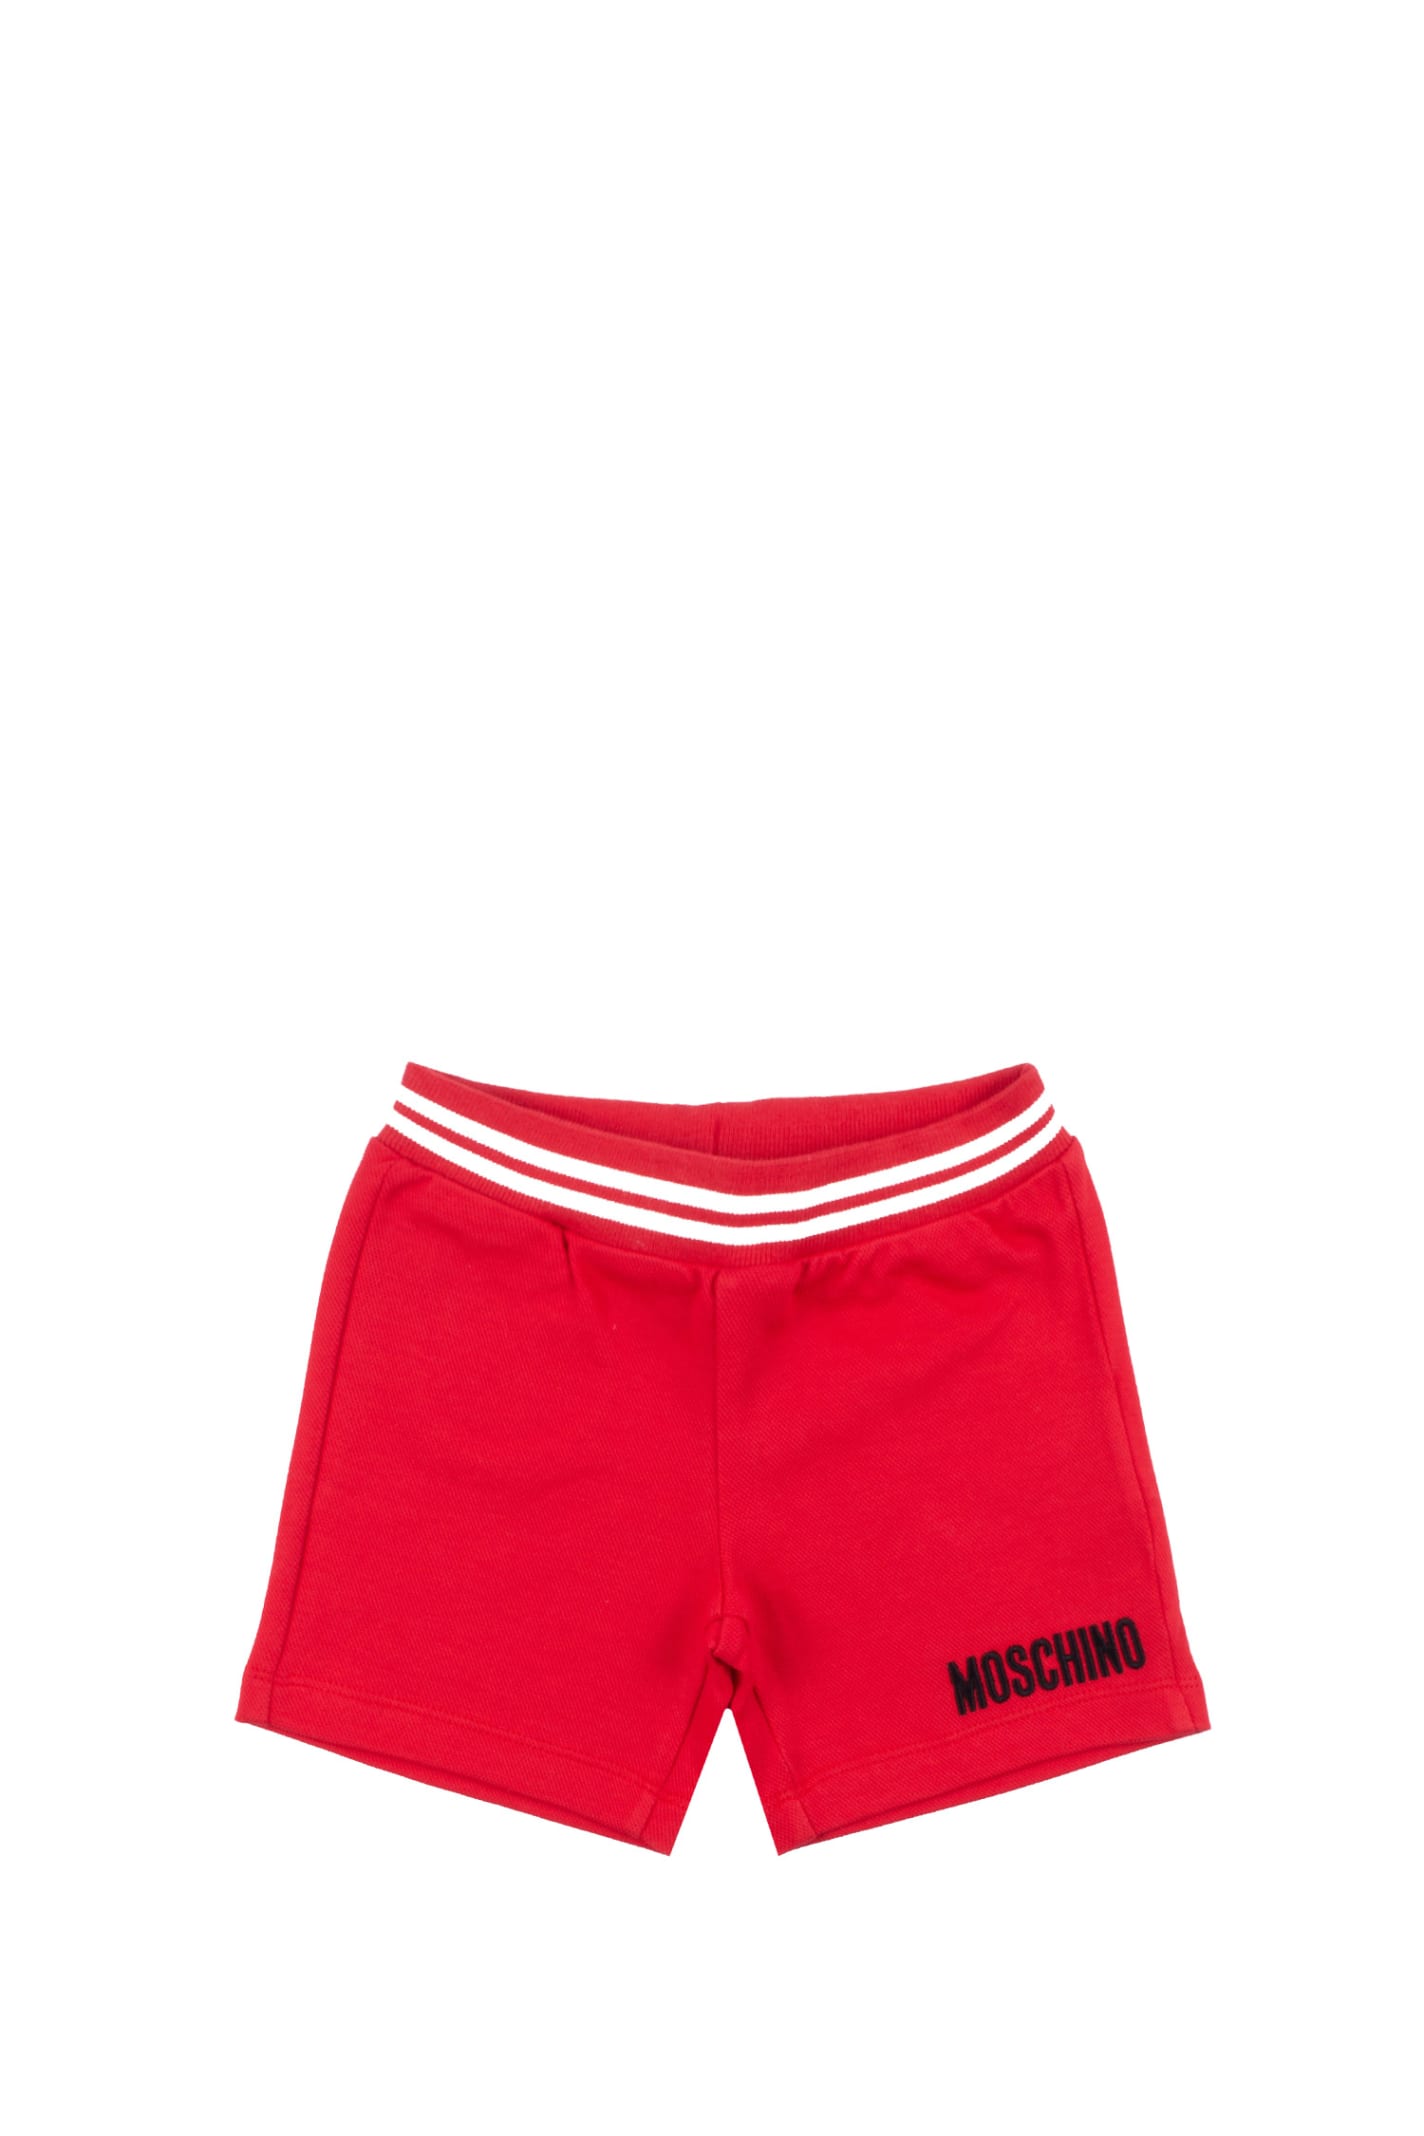 Moschino Babies' Cotton Shorts In Red